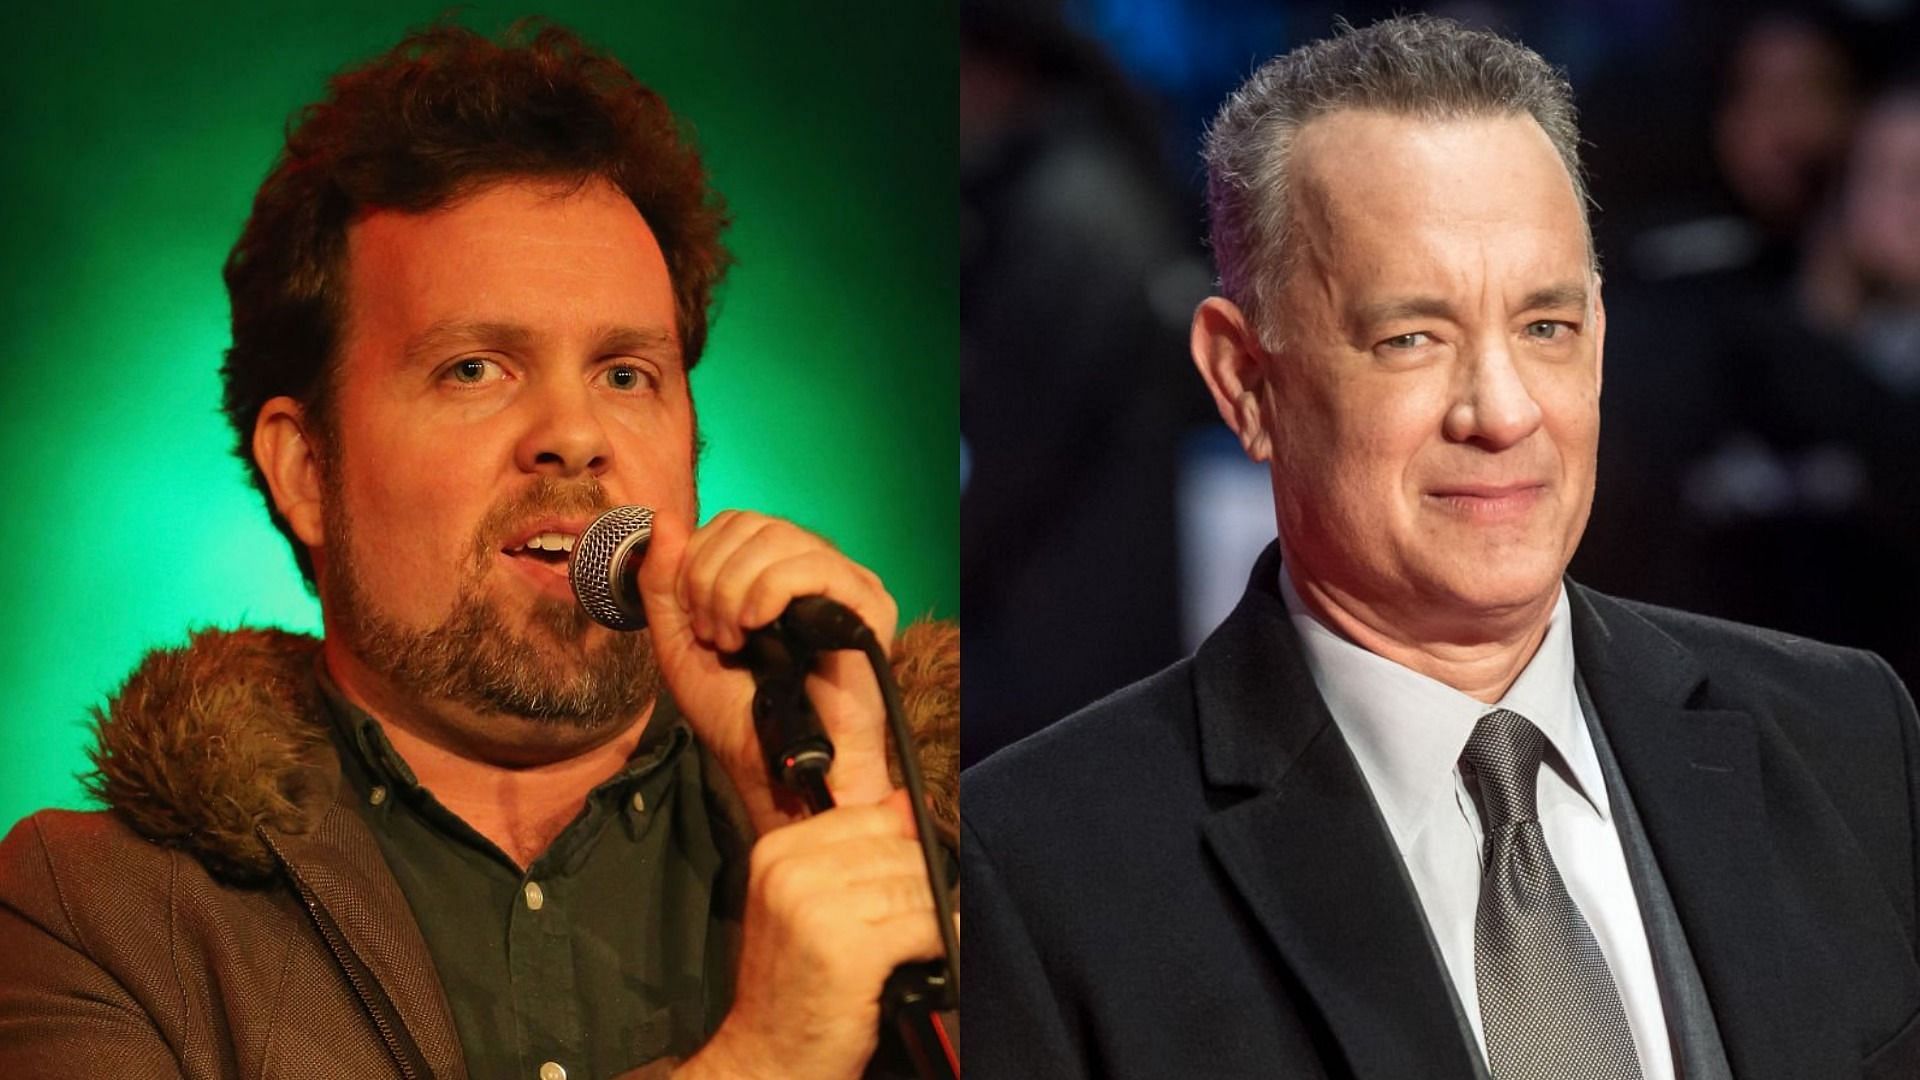 Connor Ratliff is set to face Tom Hanks 22 years after the latter fired him from Band of Brothers (Image via Al Pereira/WireImage and Samir Hussein/WireImage)